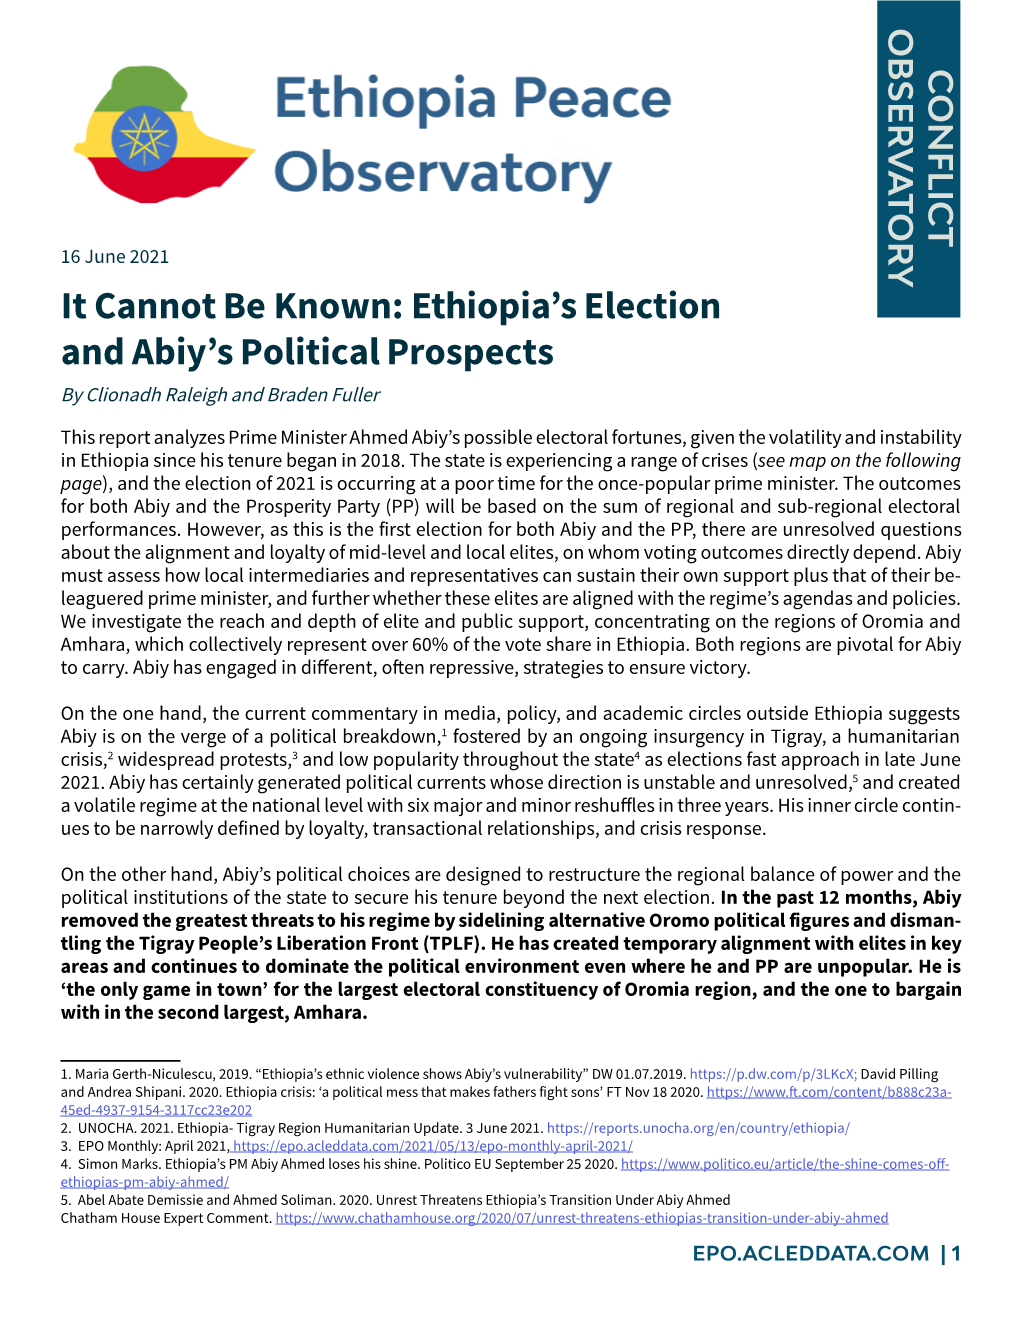 Ethiopia's Election and Abiy's Political Prospects